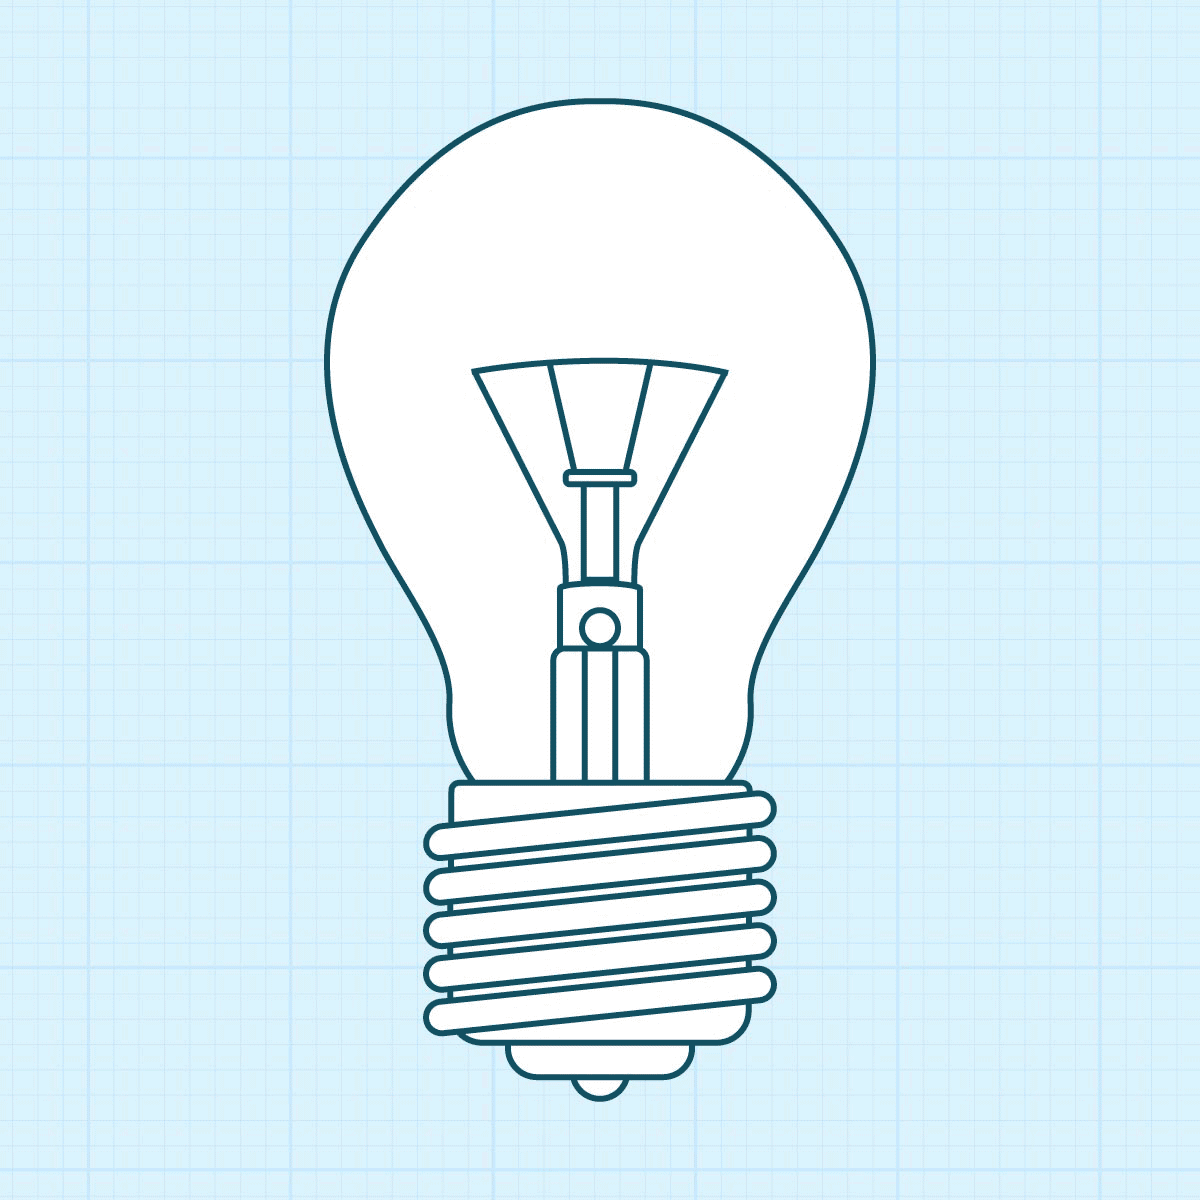 4 Light Bulb Base Types To Know About